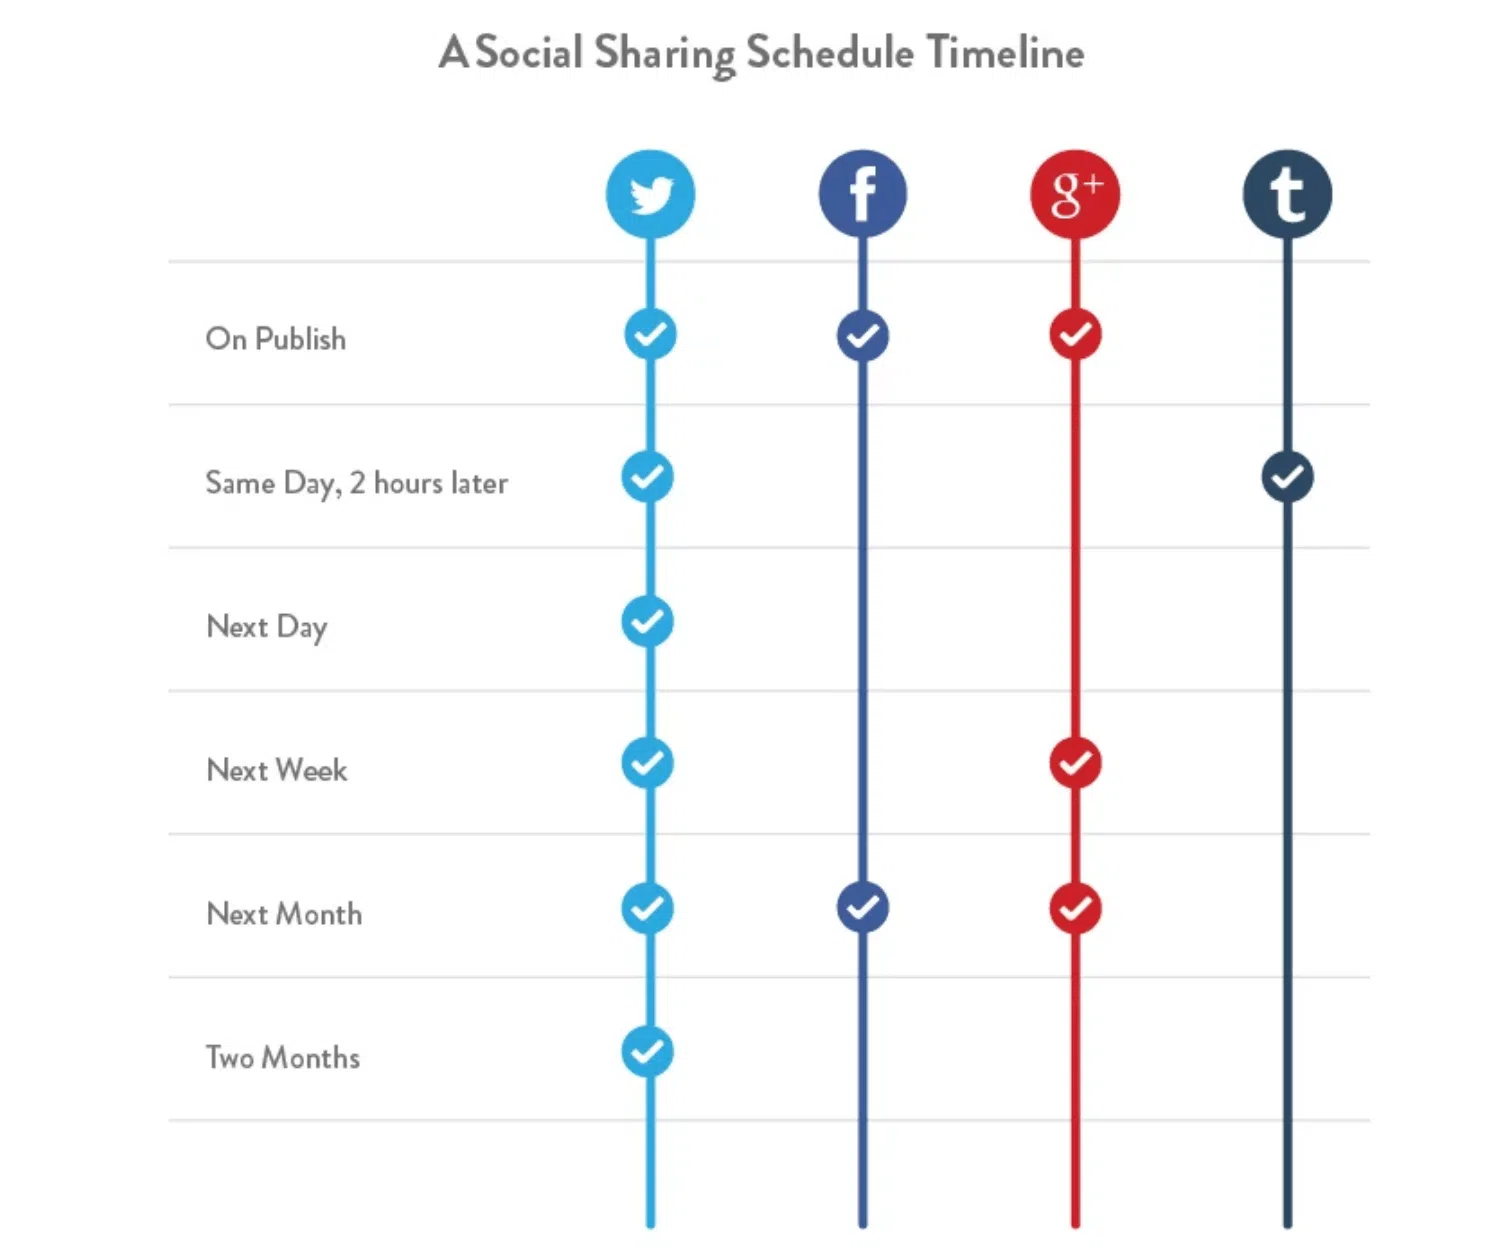 Social sharing schedule